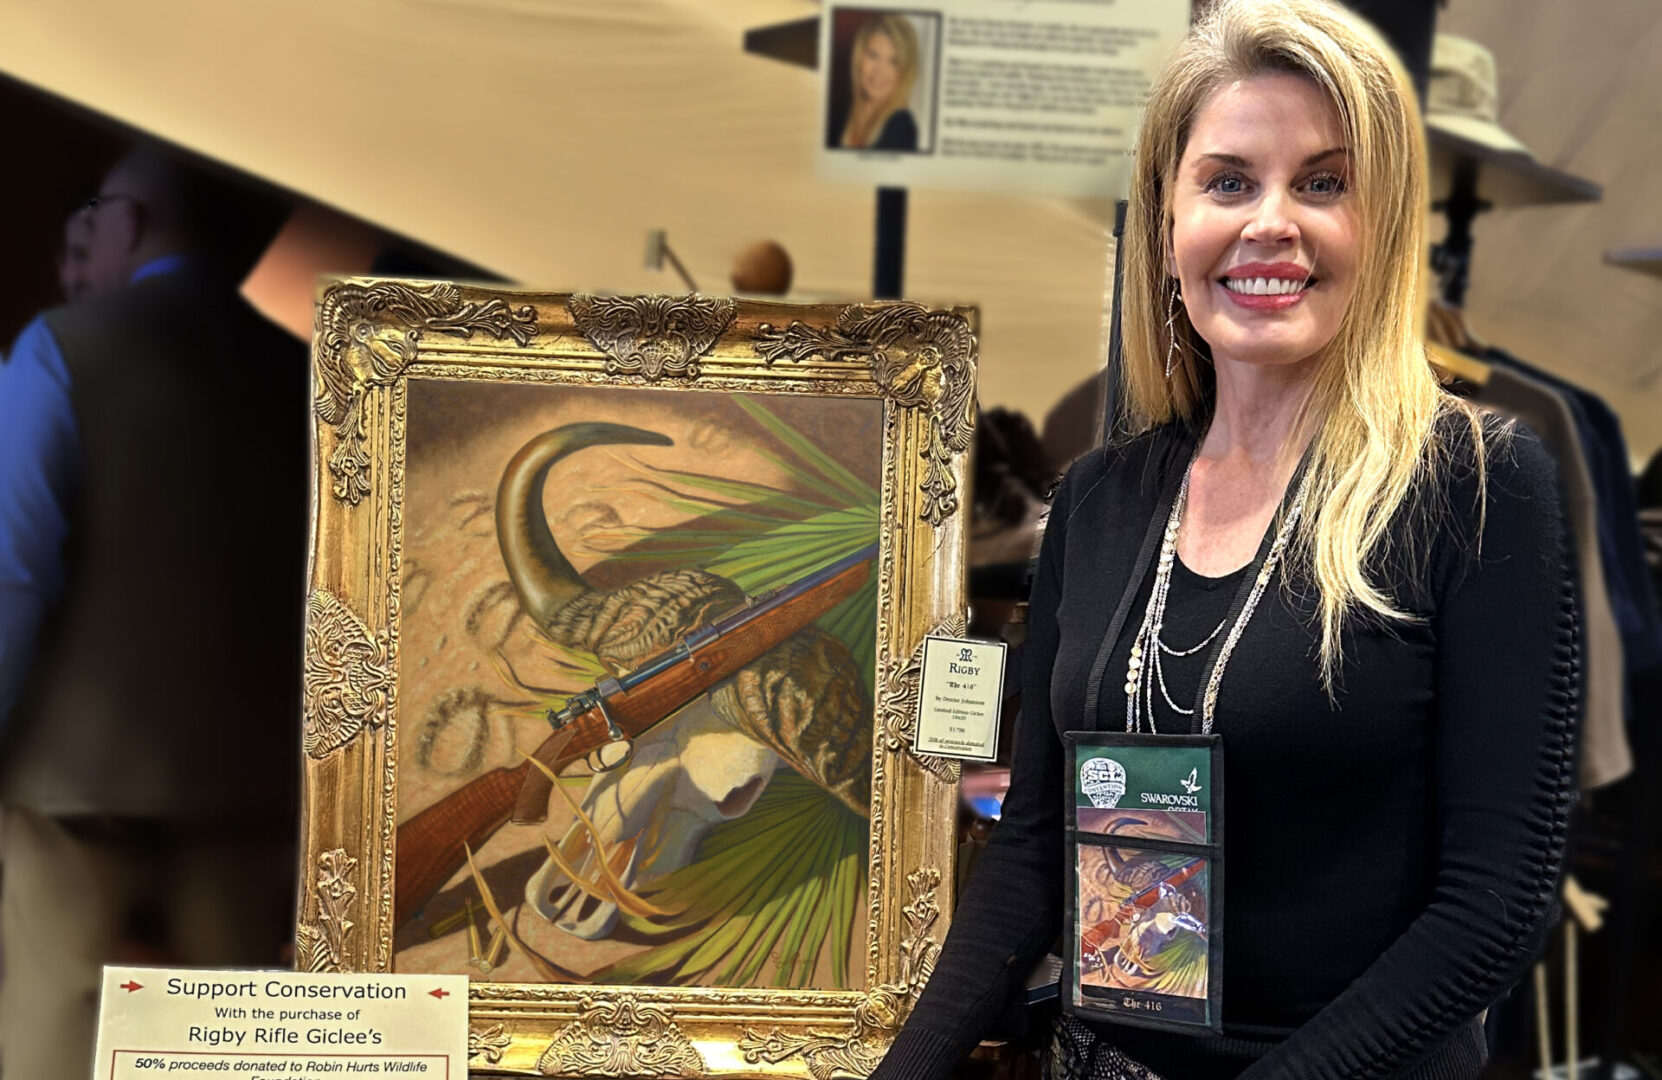 A woman standing next to a painting of a bird.